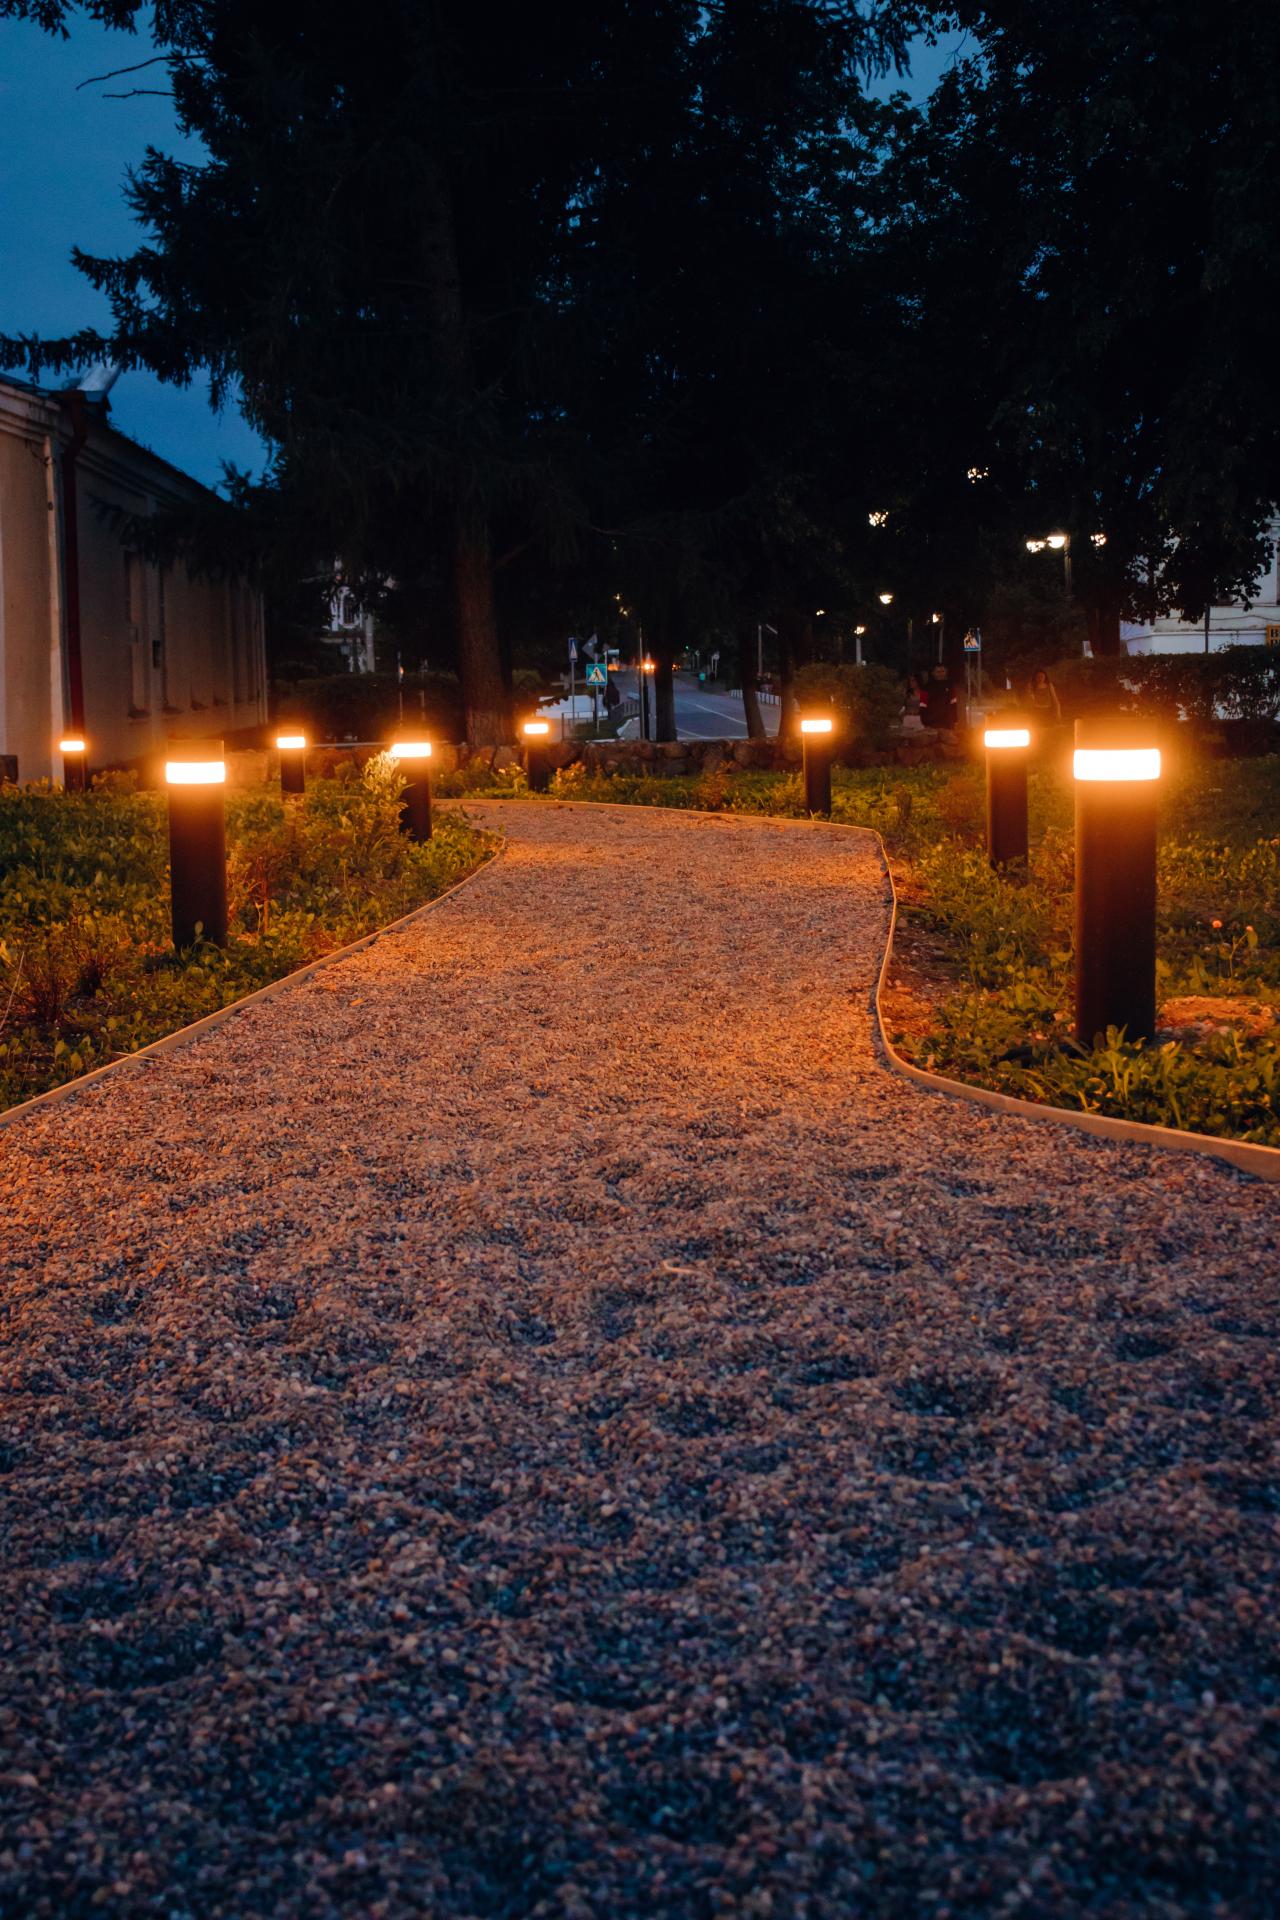 Landscape Lighting of the Square